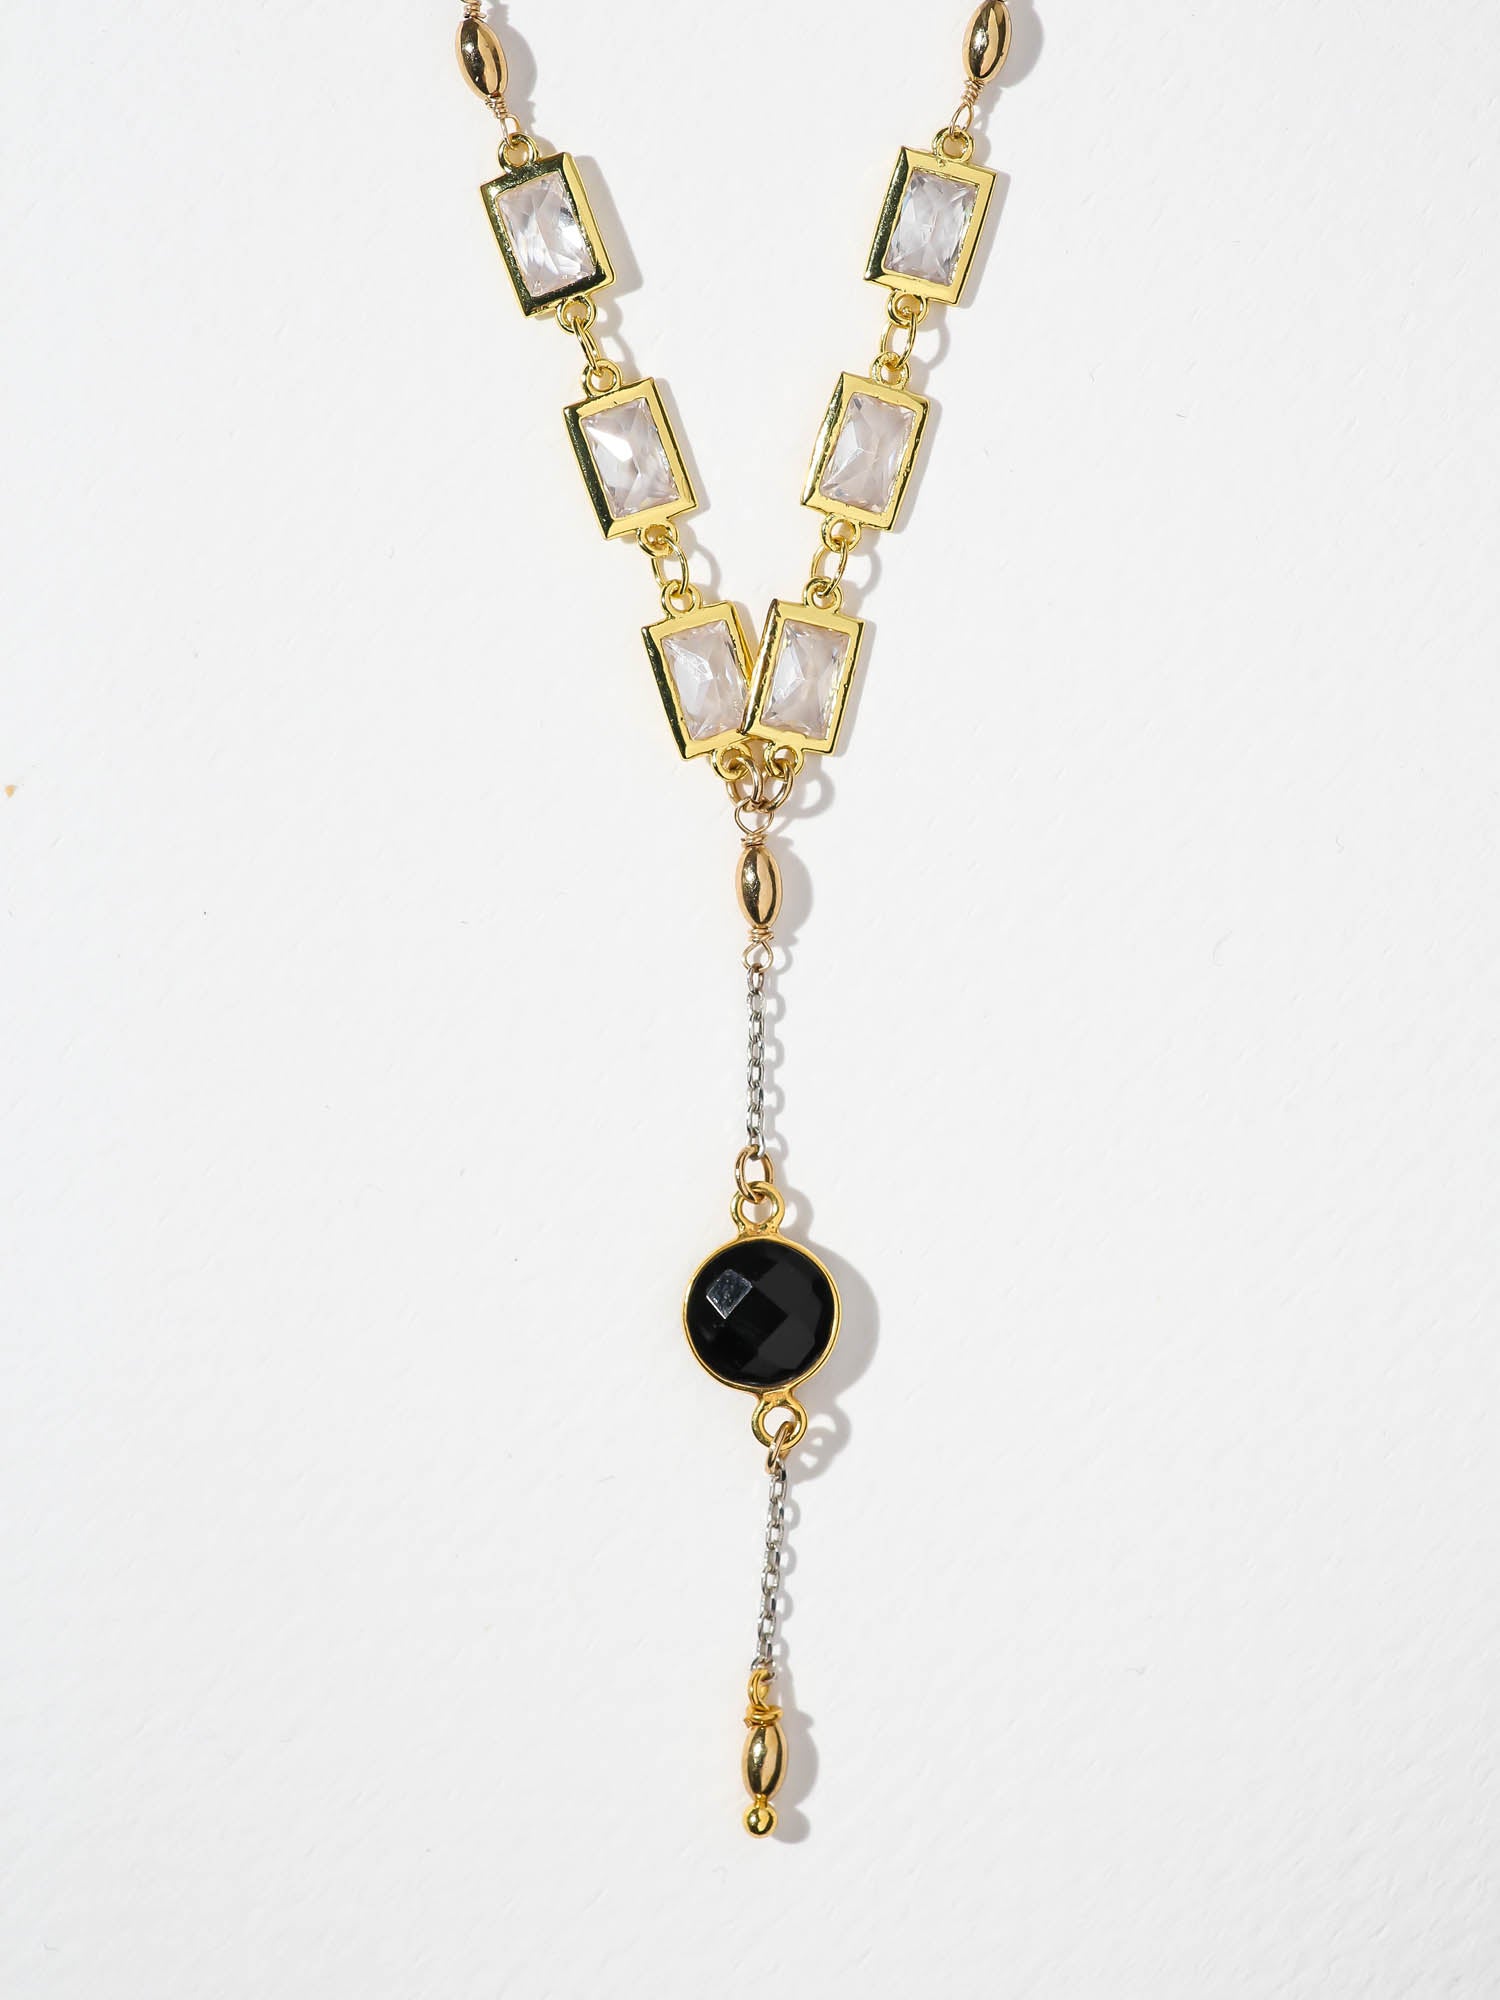 The Luciana Necklace